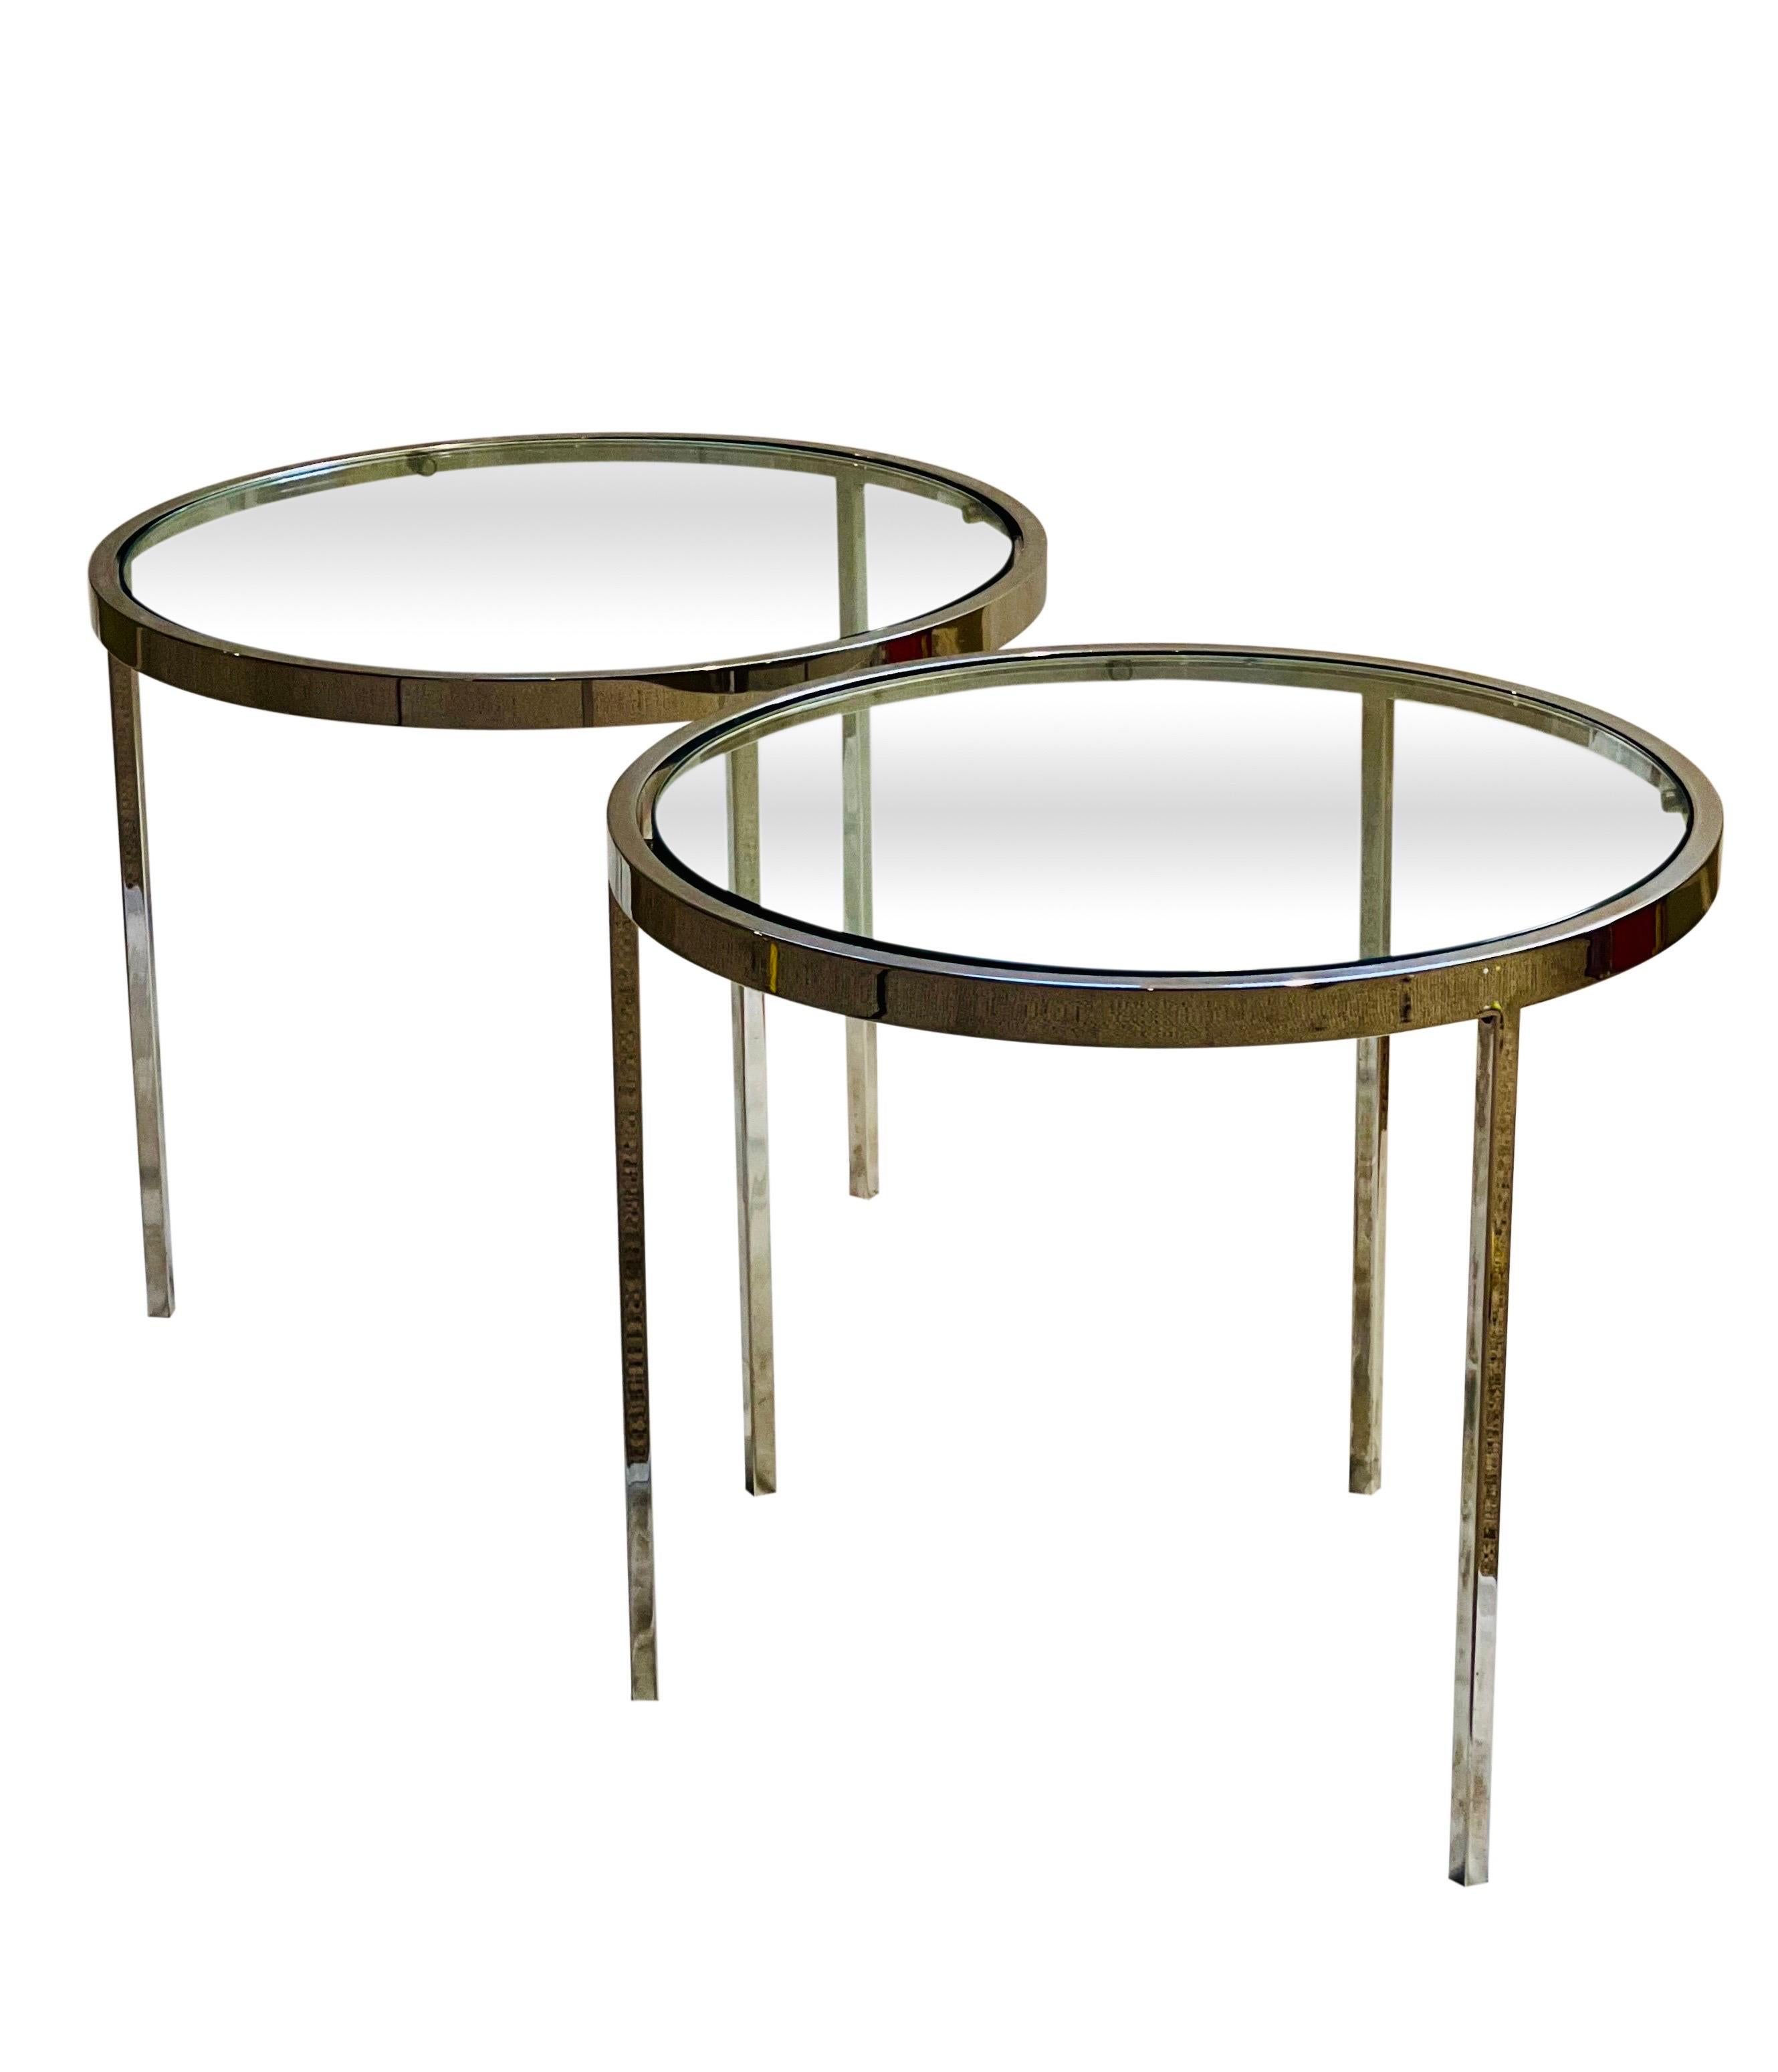 Polished Milo Baughman Flat Bar Chrome and Glass Low Side Tables, Pair